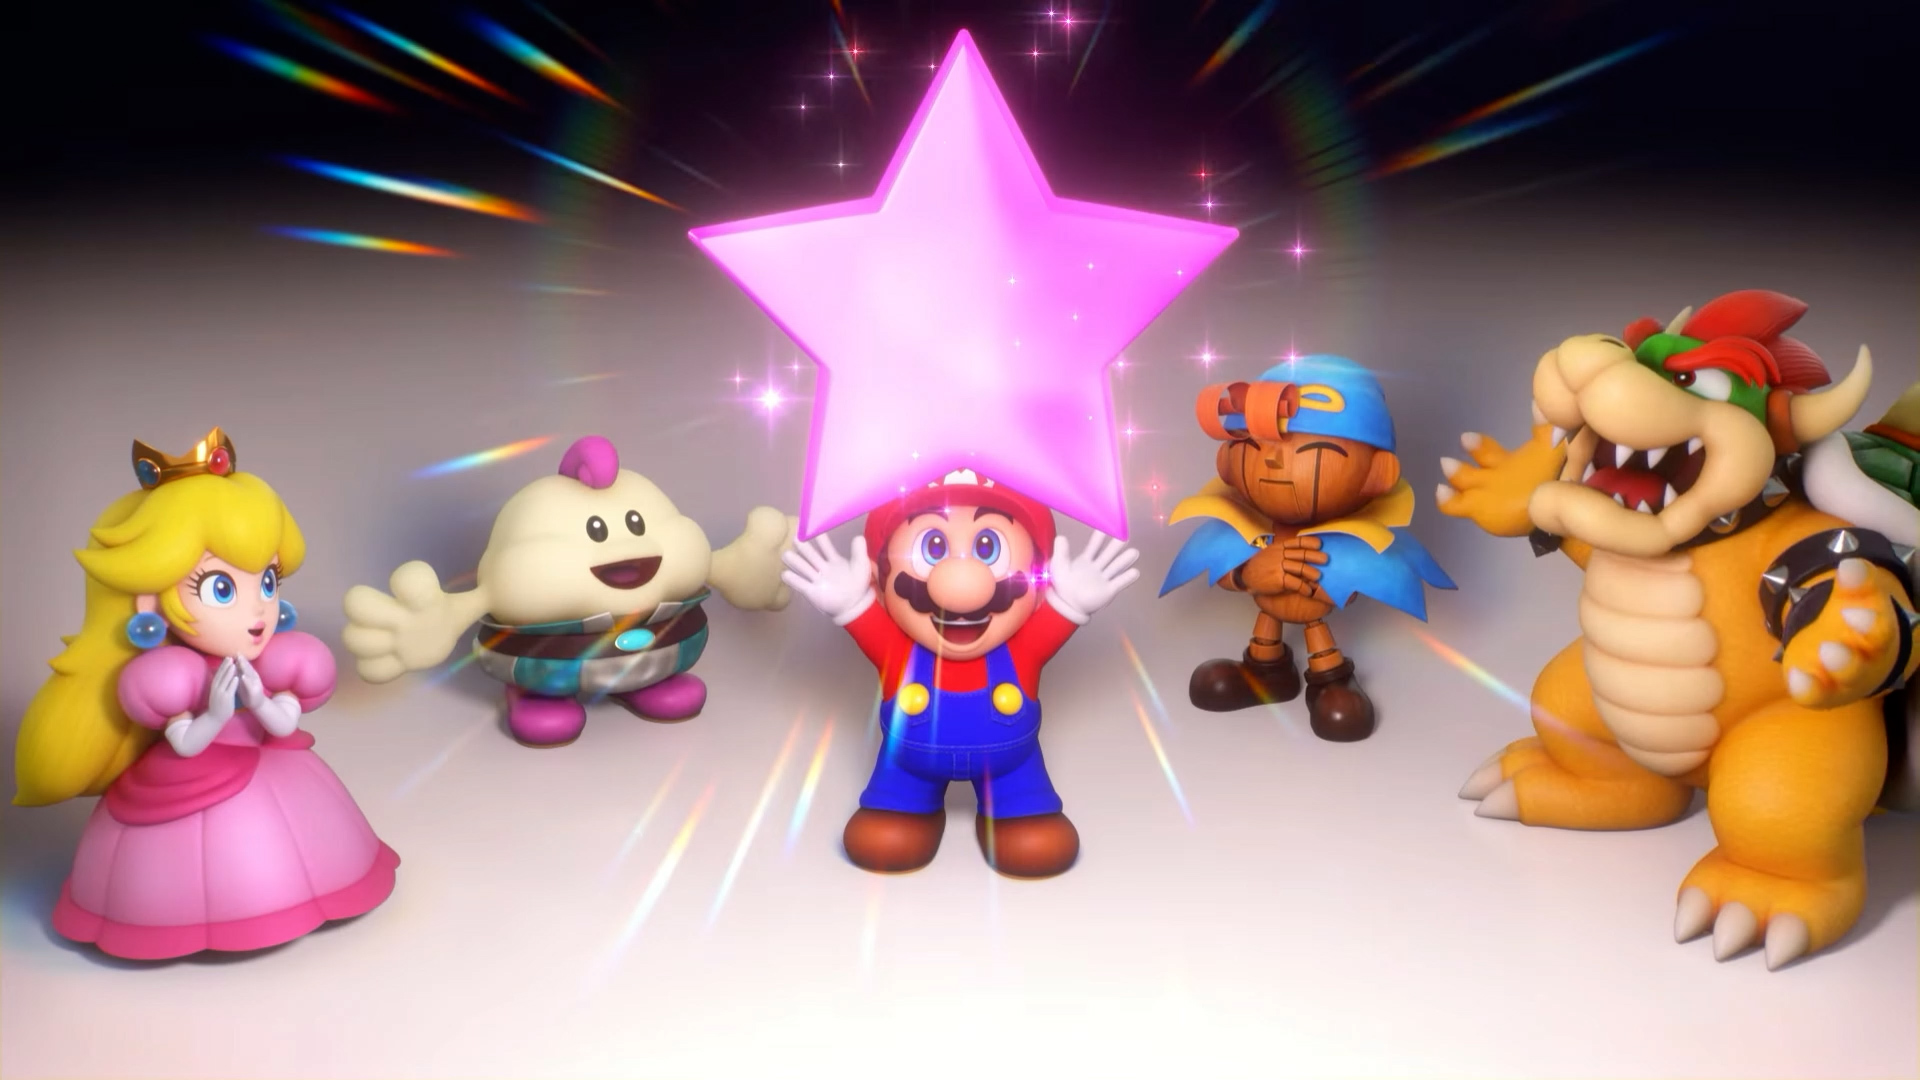 Super Mario RPG Mario holding star with Peach, Mallow, Geno and Bowser